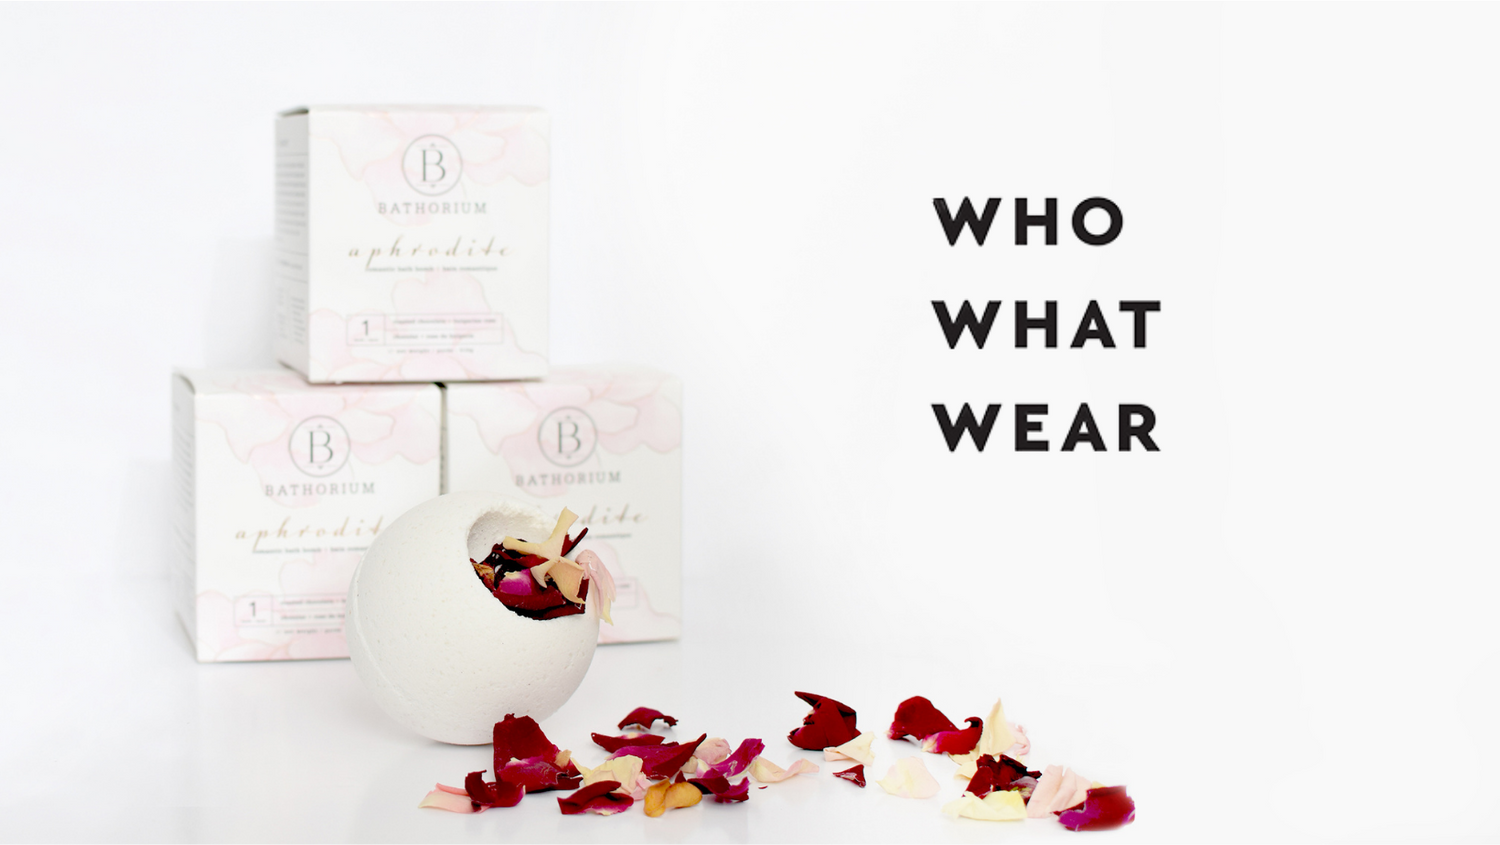 WHO WHAT WEAR: For a luxurious experience choose Aphrodite Bath Bomb